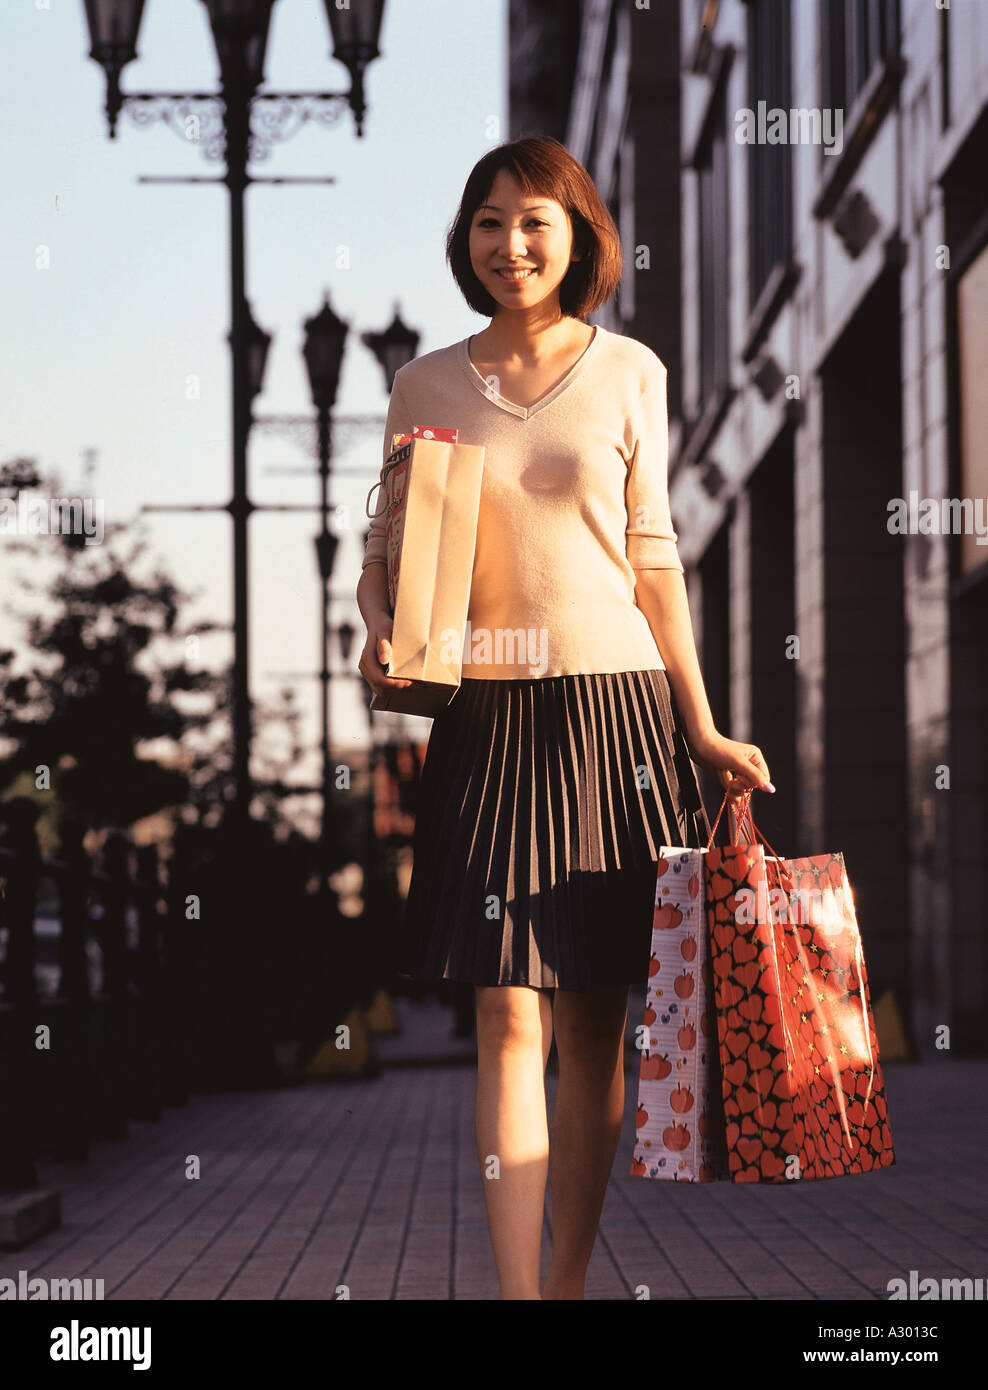 a chinese young woman holding shopping bags walking along the street Stock Photo